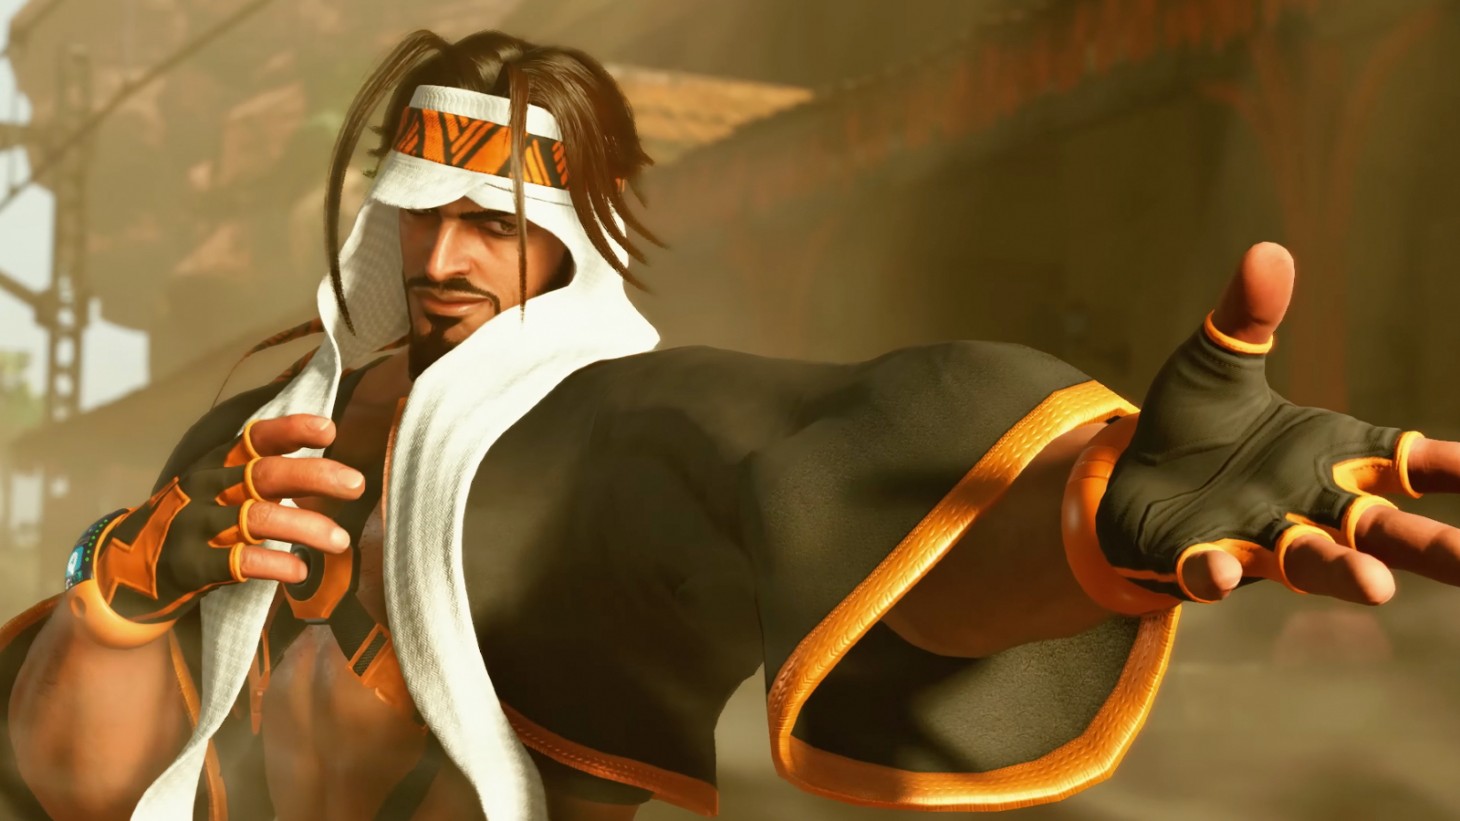 Rashid Hits The Street Fighter 6 Roster Later This Month - Game